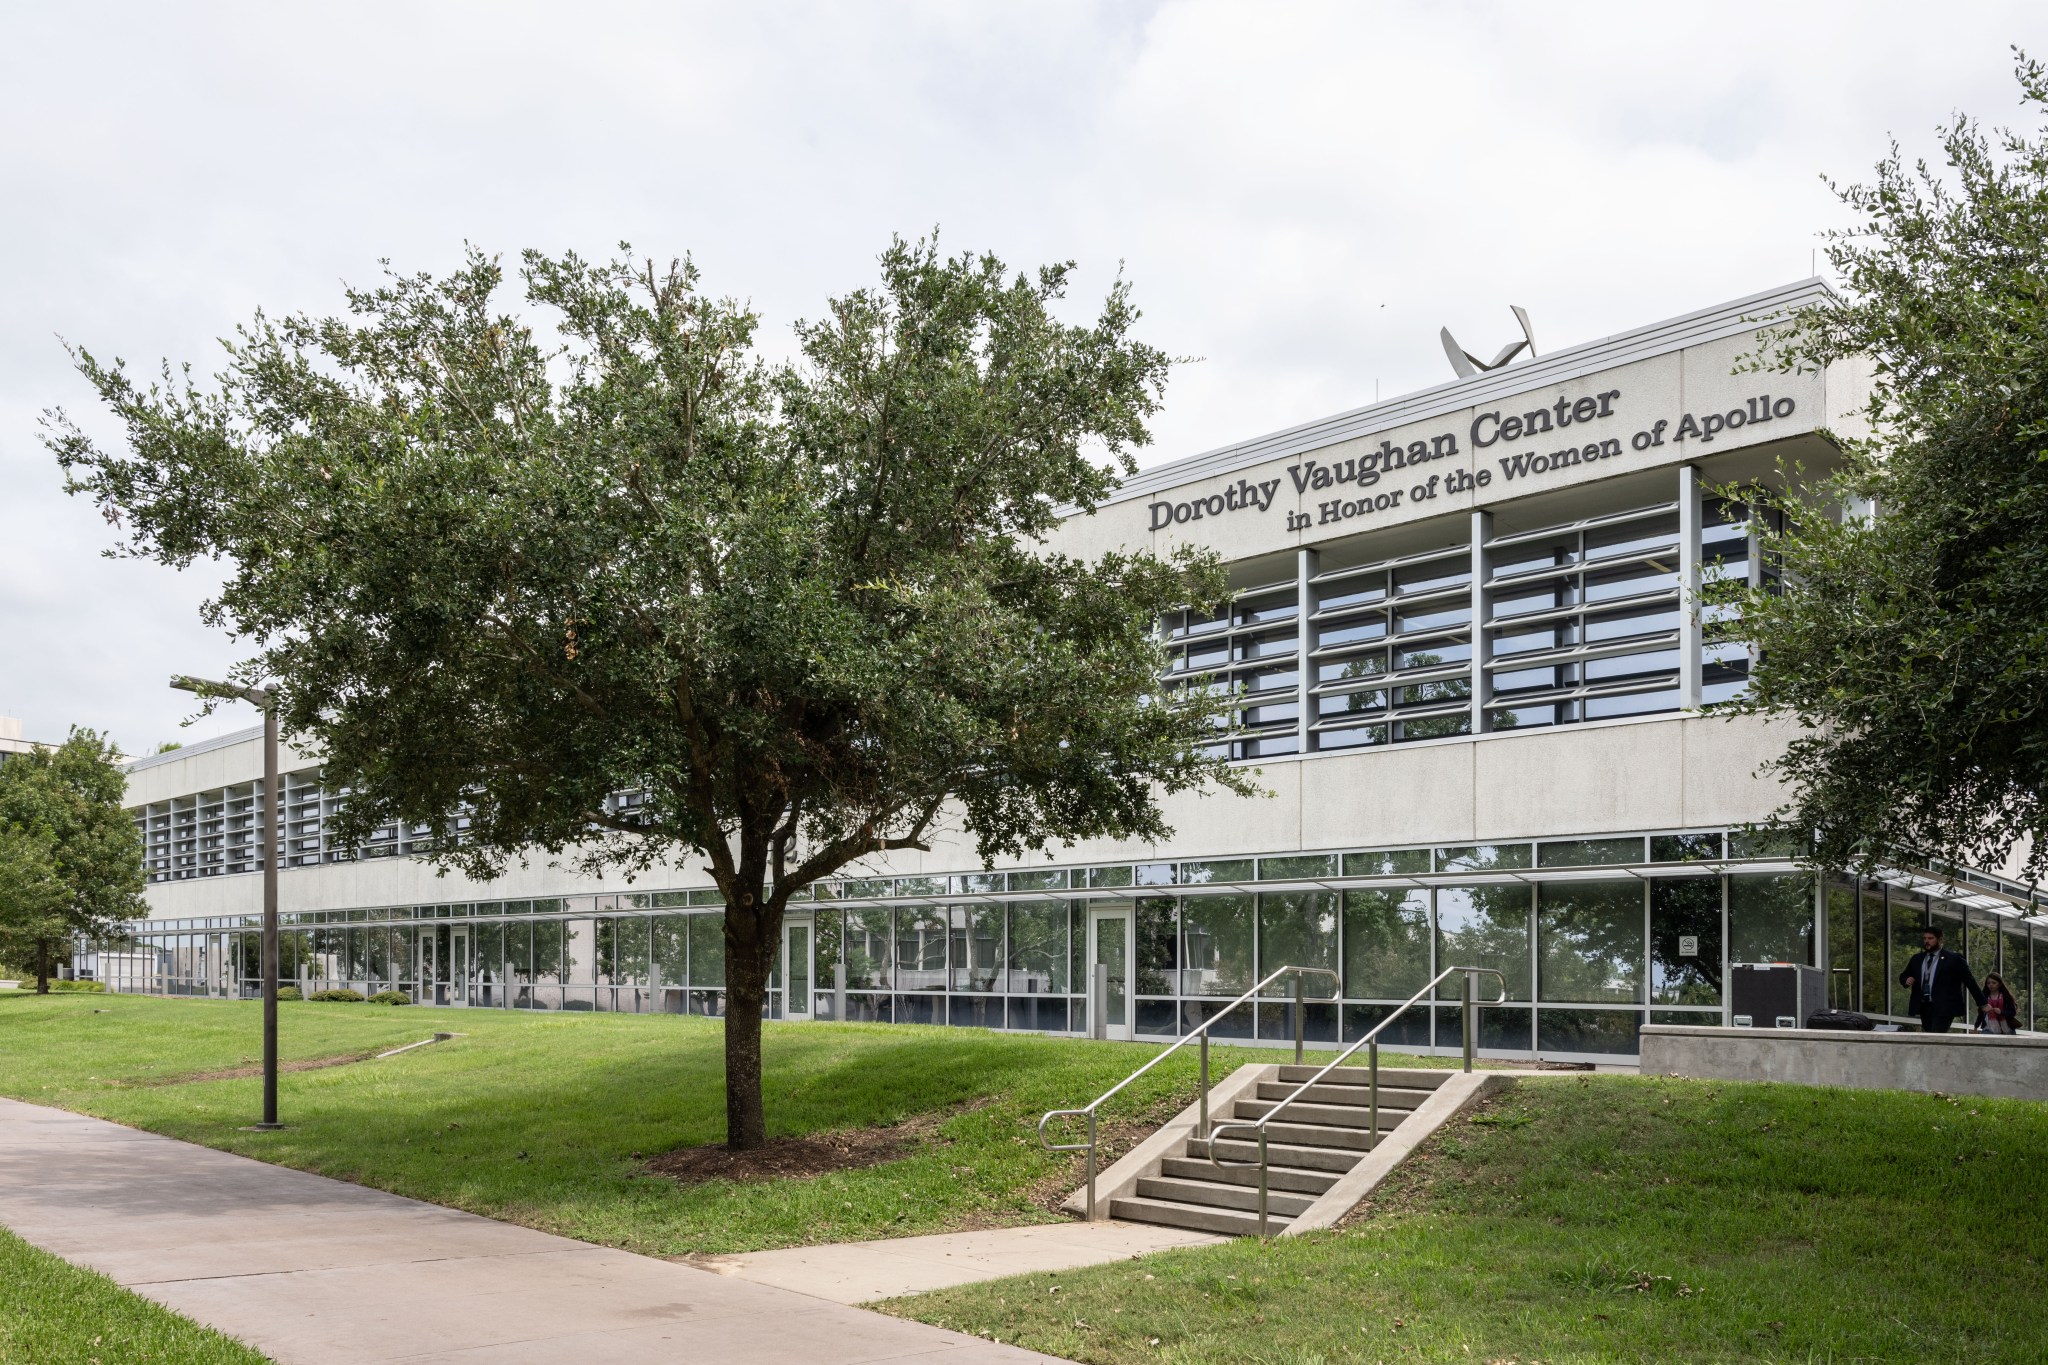 The image shows the exterior of a building named “Dorothy Vaughan Center in Honor of the Women of Apollo.” The building features modern architecture with large windows and a flat roof.